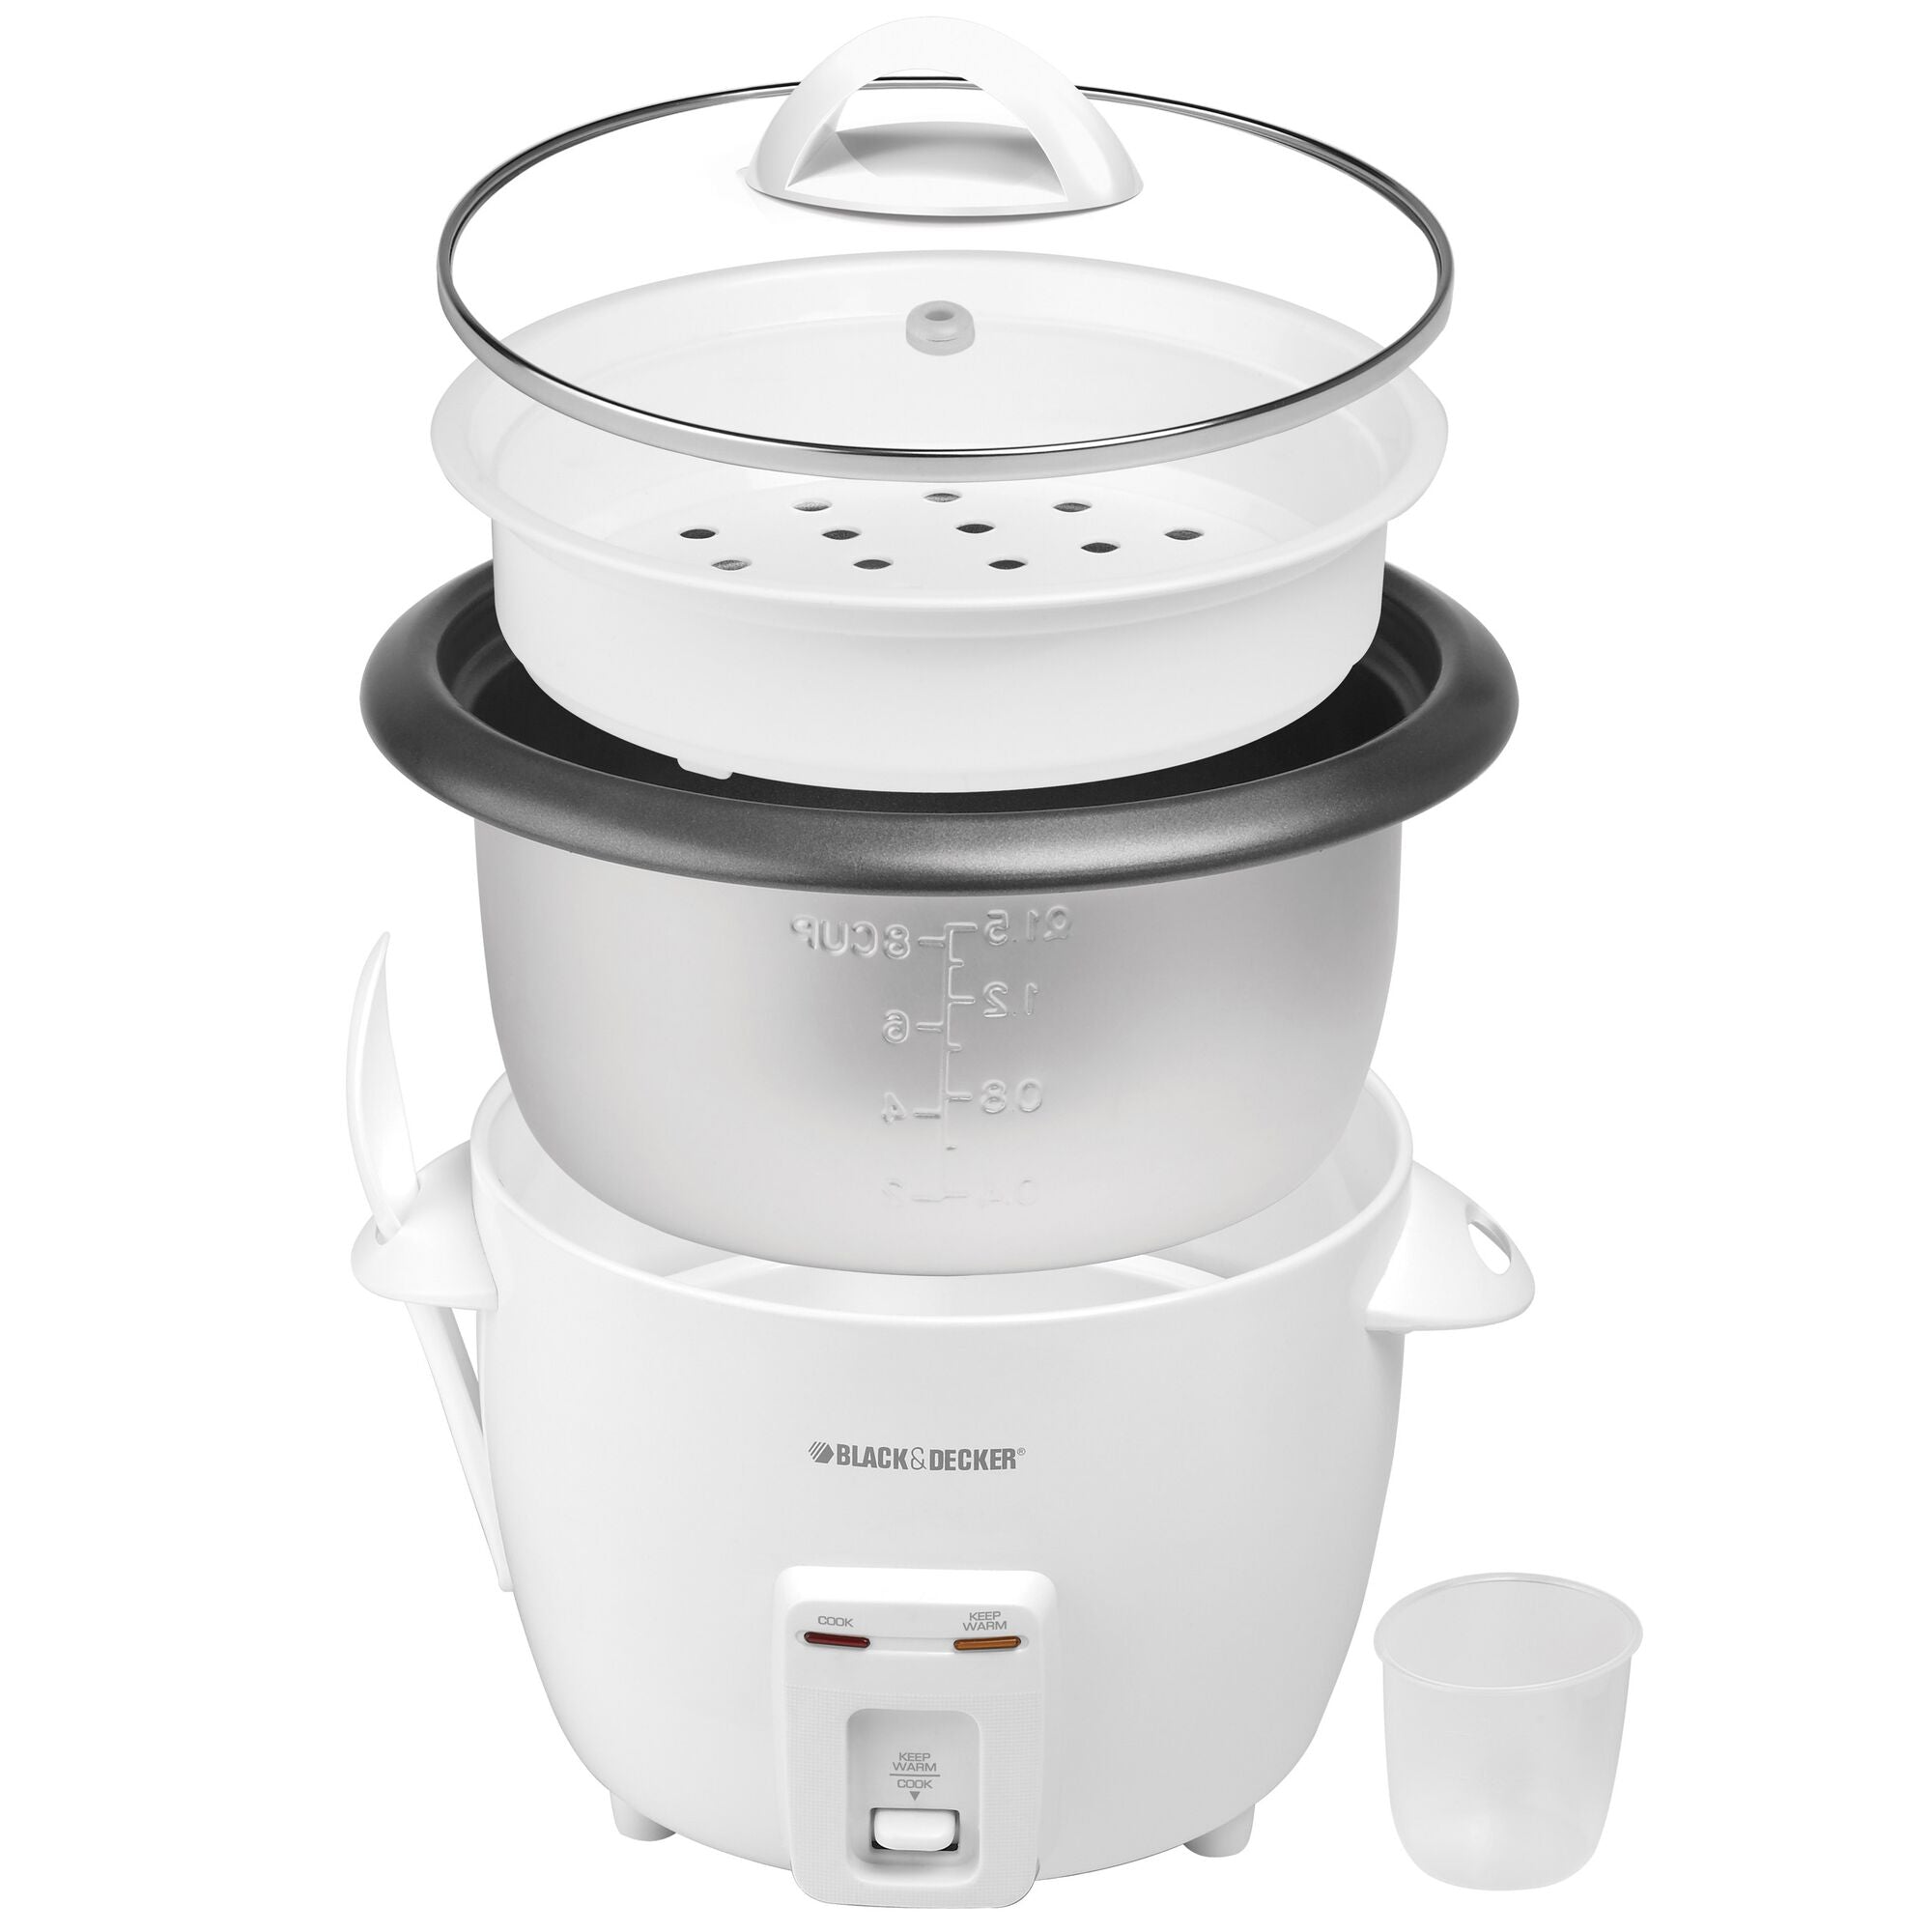 Black & Decker White Rice Cookers